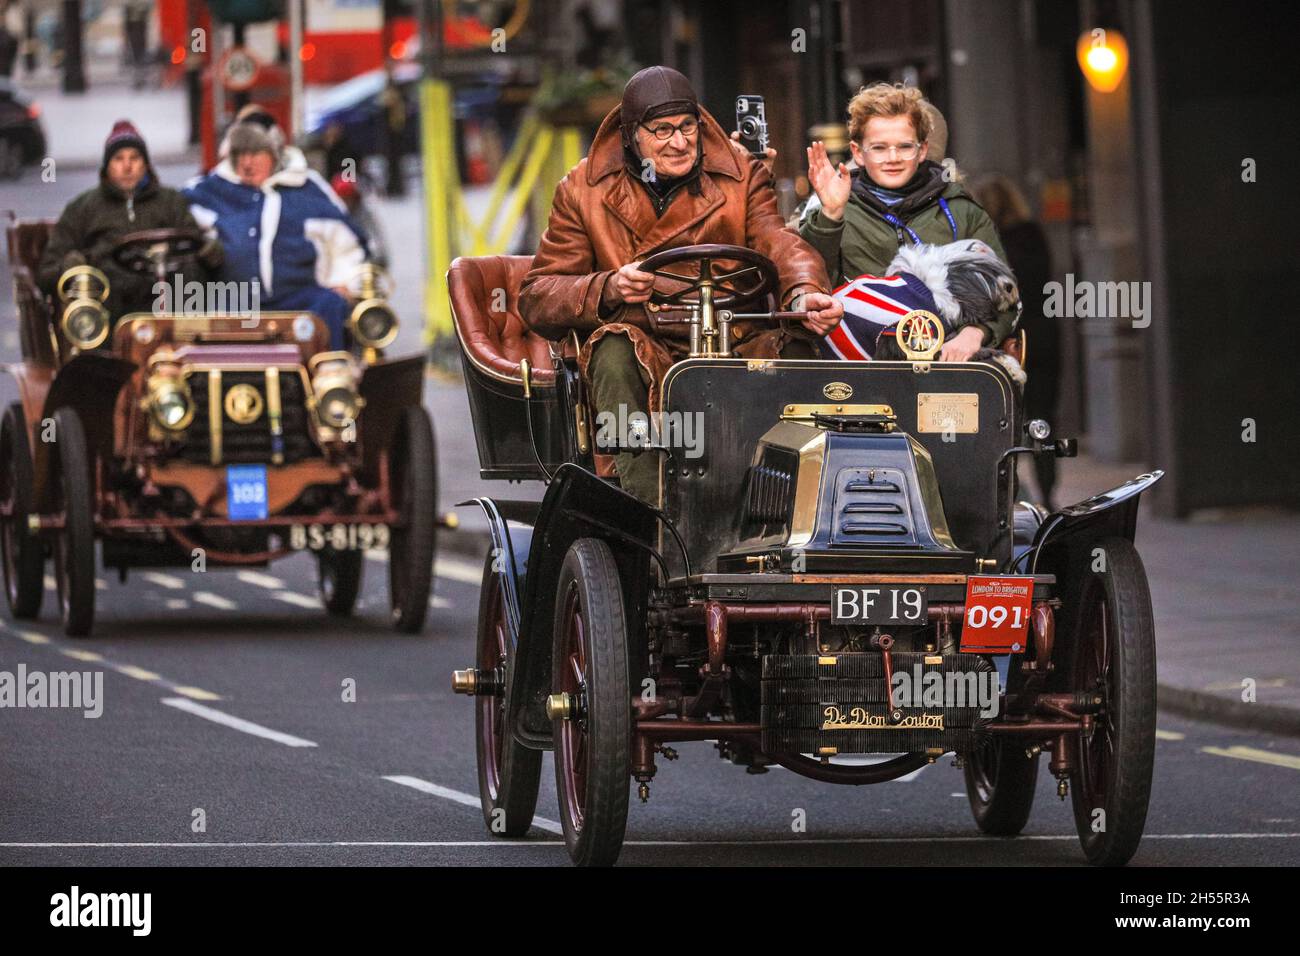 Westminster, London, UK. 07th Nov, 2021. A1902 De Dion Bouton makes its way down Whitehall. The veteran cars on Whitehall.This year marks the 125th anniversary of the historic London to Brighton Veteran Car Run. To mark the occasion, more than 320 pioneering ‘horseless carriages' from the dawn of motoring will Hyde Park in London at sunrise and make the same journey to Brighton on the Sussex coast. Credit: Imageplotter/Alamy Live News Stock Photo